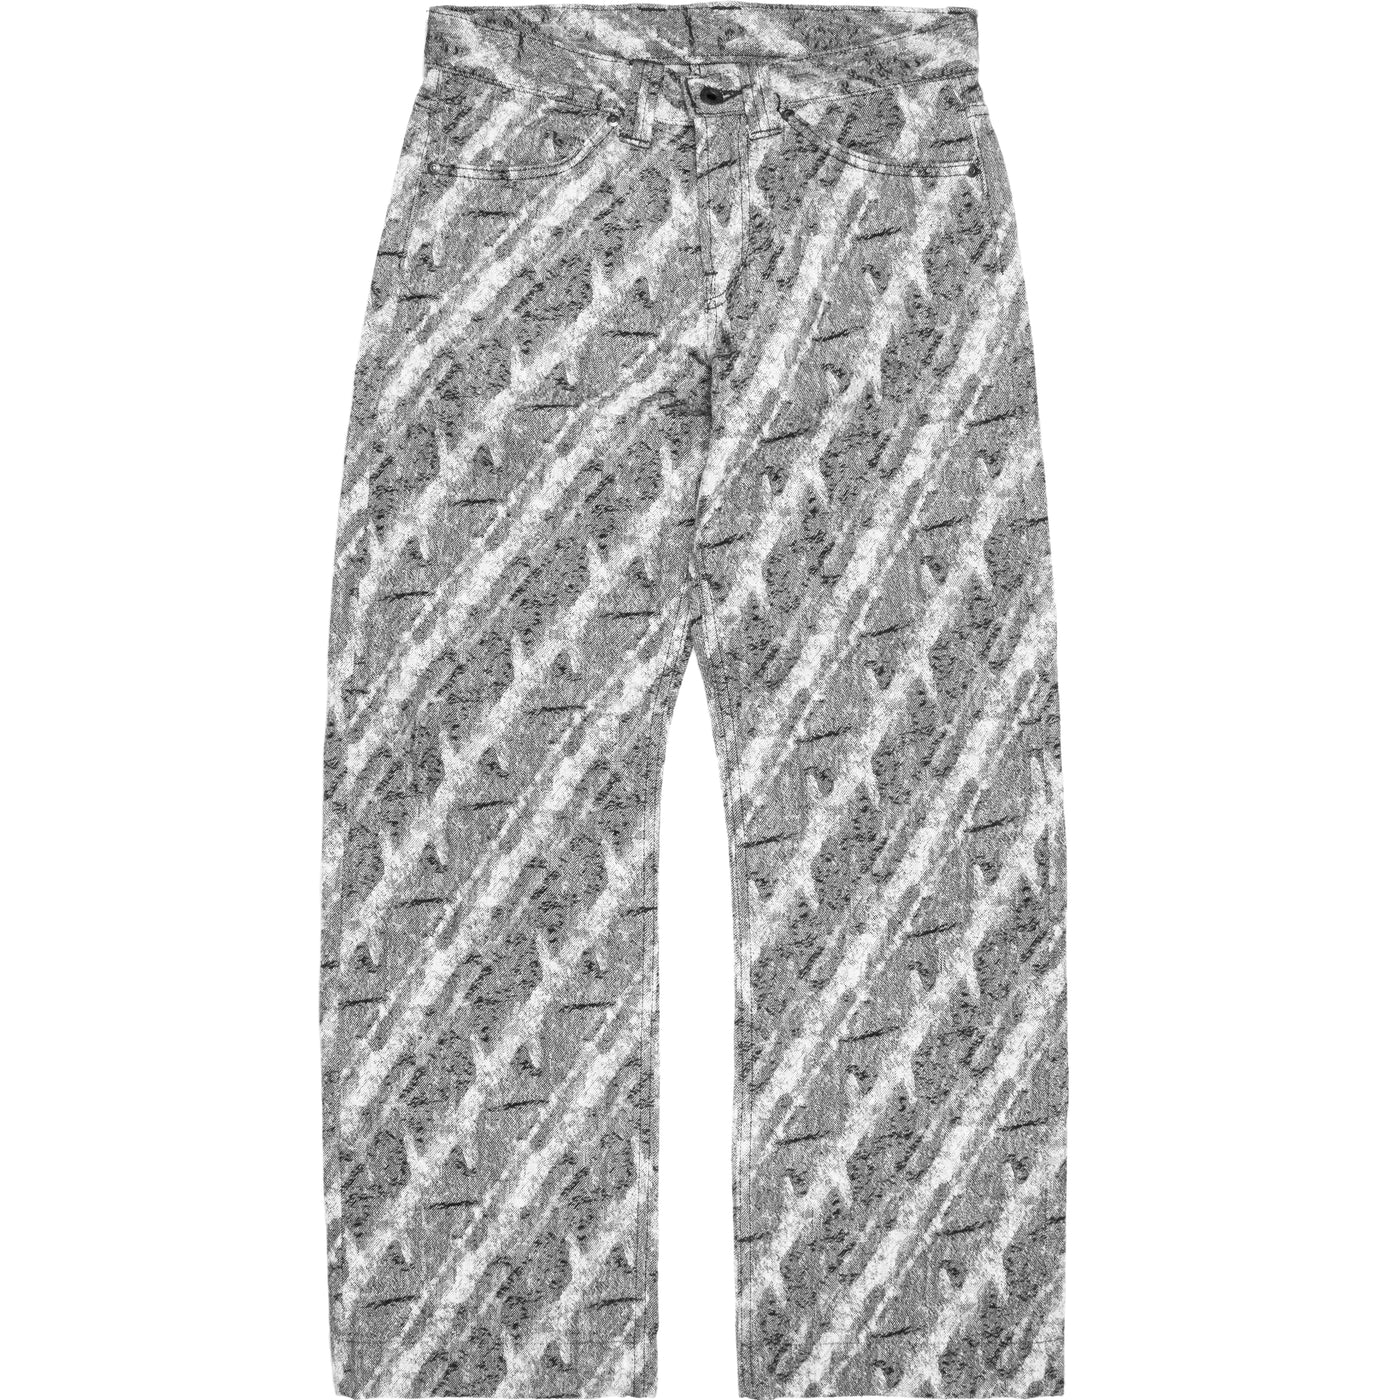 Issey Miyake APOC Knitted Jean – SILVER LEAGUE